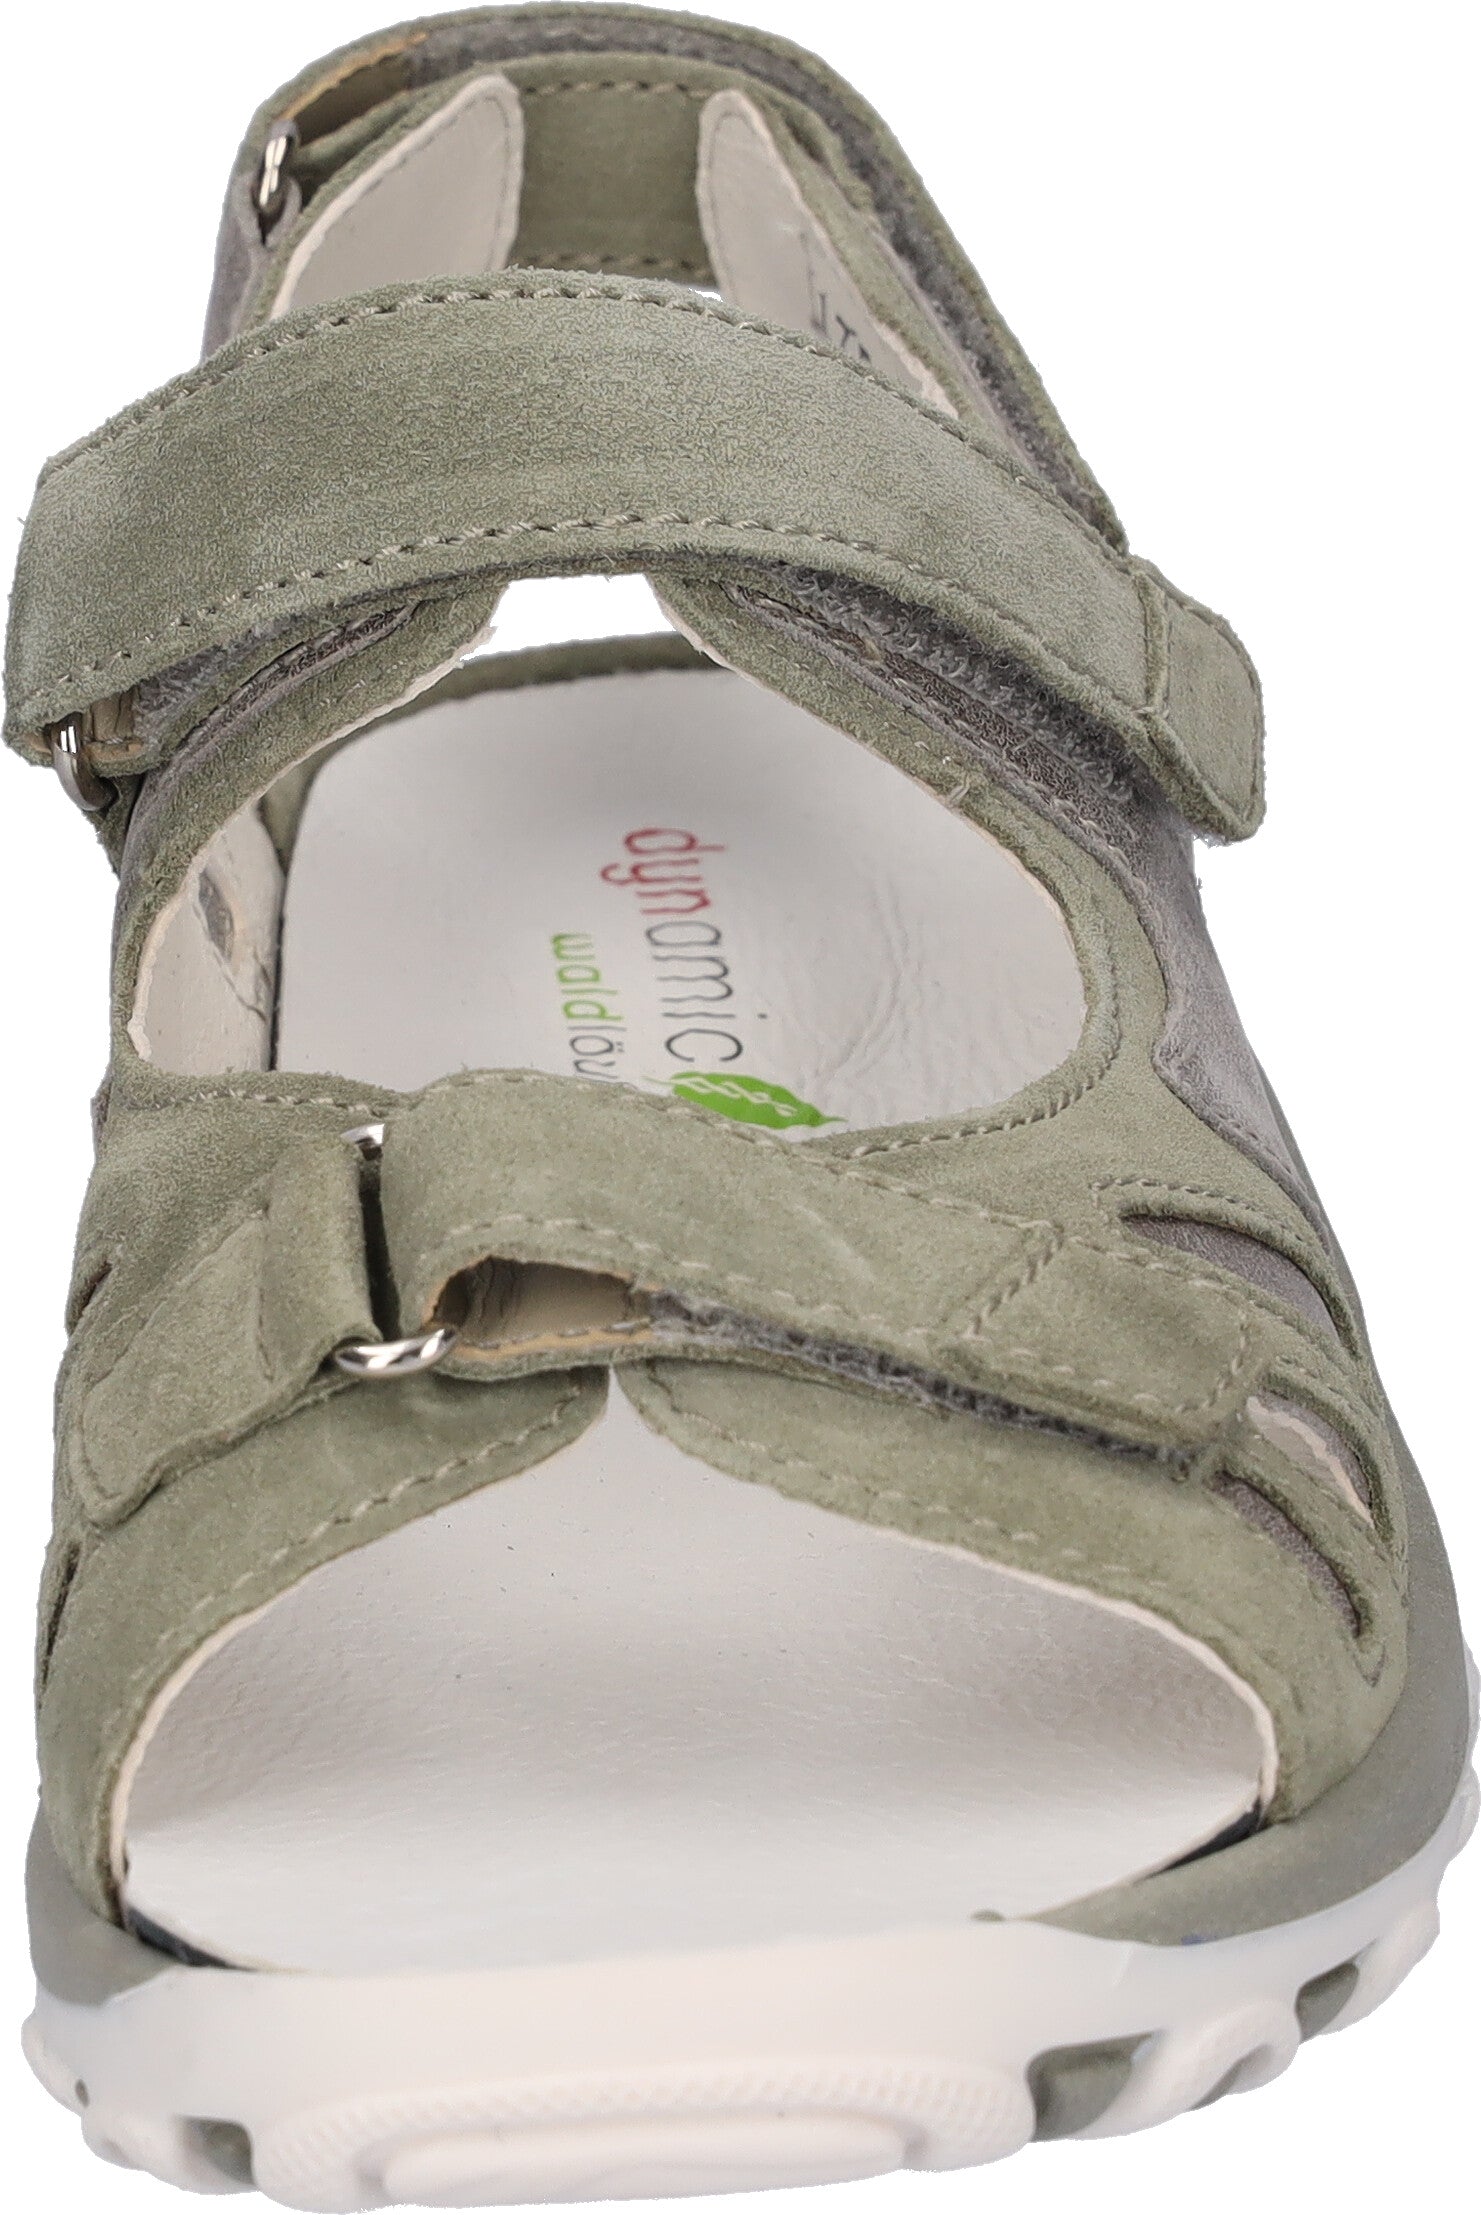 Waldlaufer 448001 235 293 Hanni Ladies Mint Stone Leather Arch Support Touch Fastening Sandals